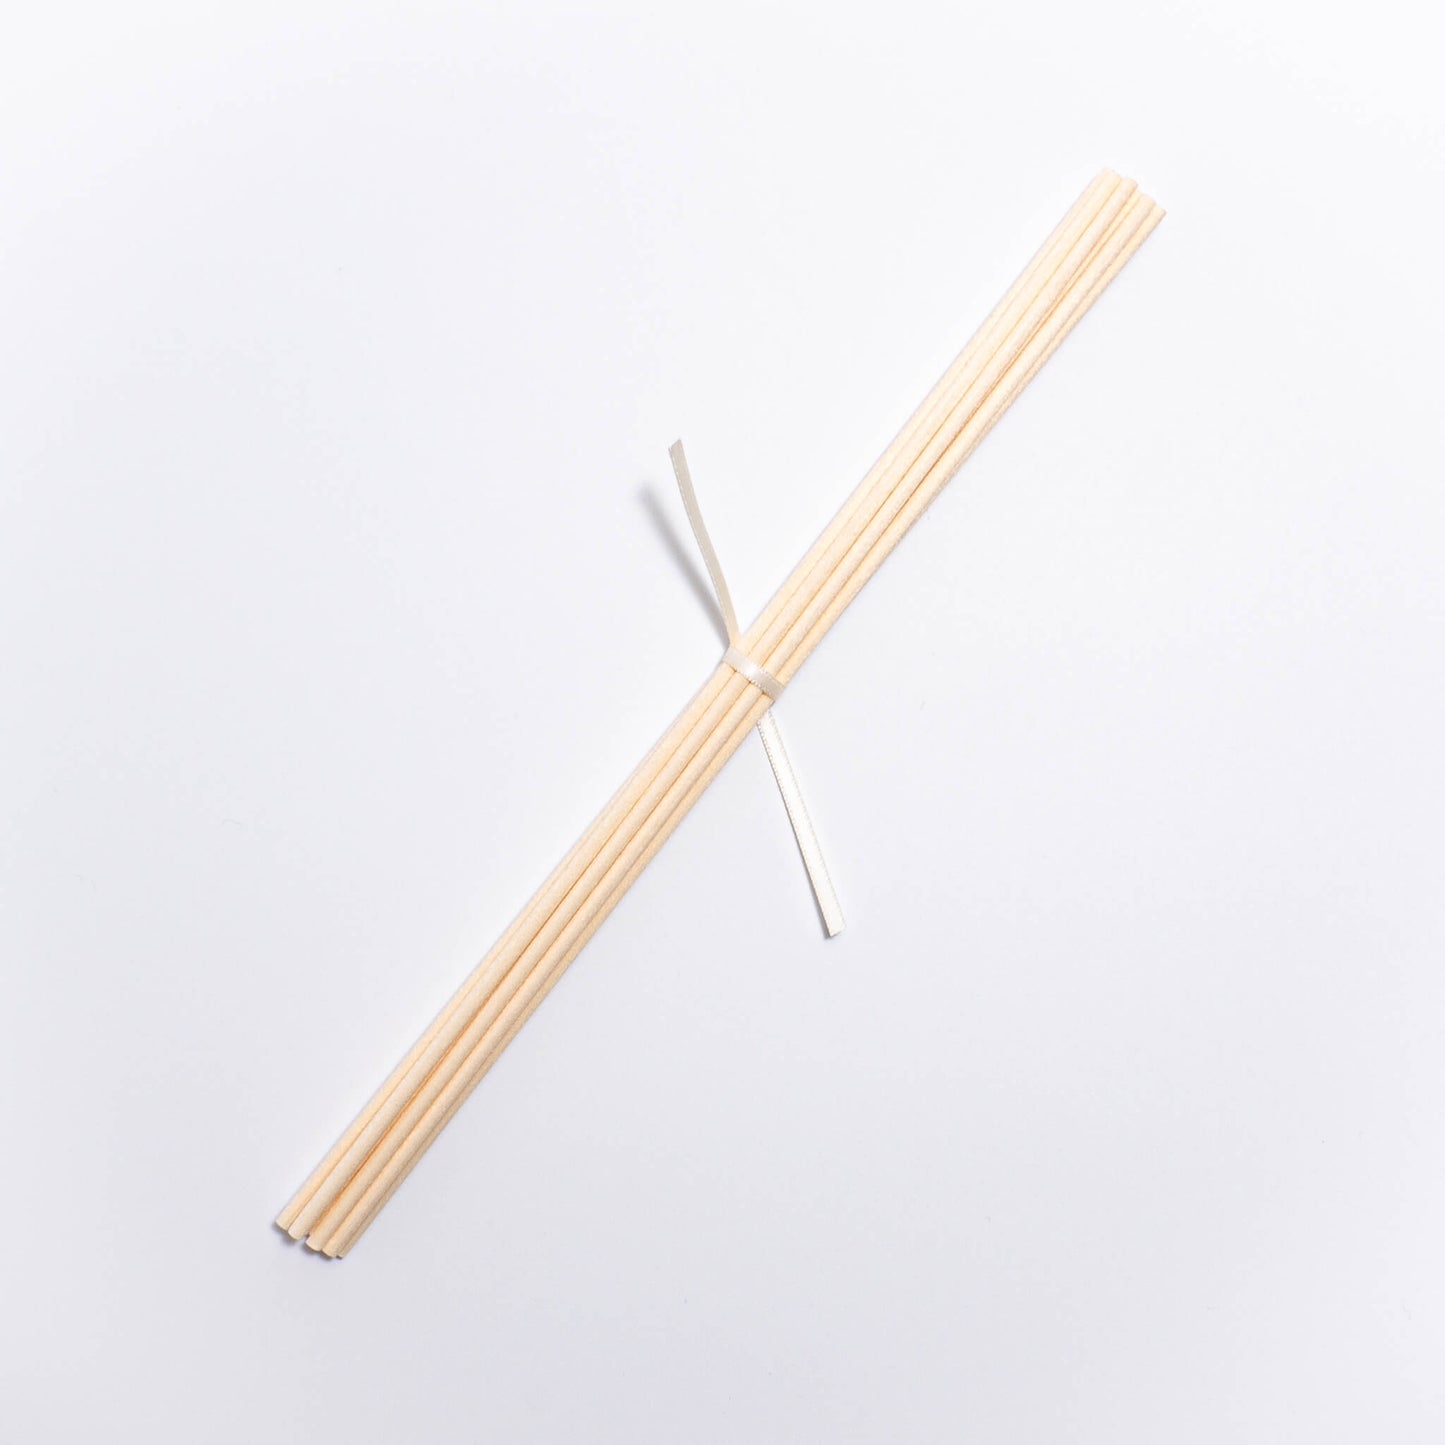 set of 10 replacement reed diffuser sticks available for purchase made from natural fibres, natural colour and wrapped with ivory ribbon